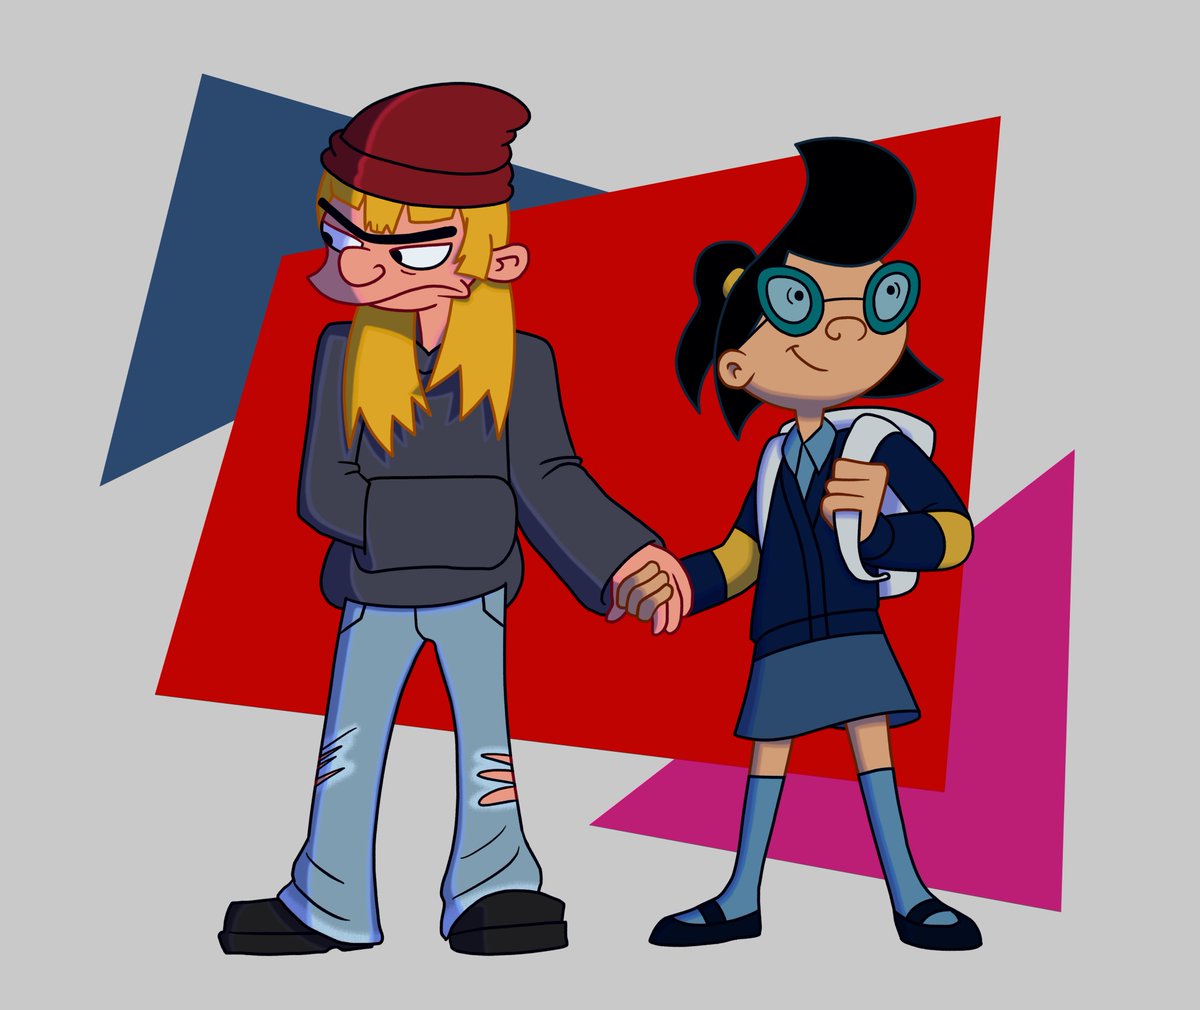 Helga and Phoebe as I'd imagine they'd appear in #ThePatakis! I'd love to see their friendship be tested #OperationThePatakis #HeyArnold